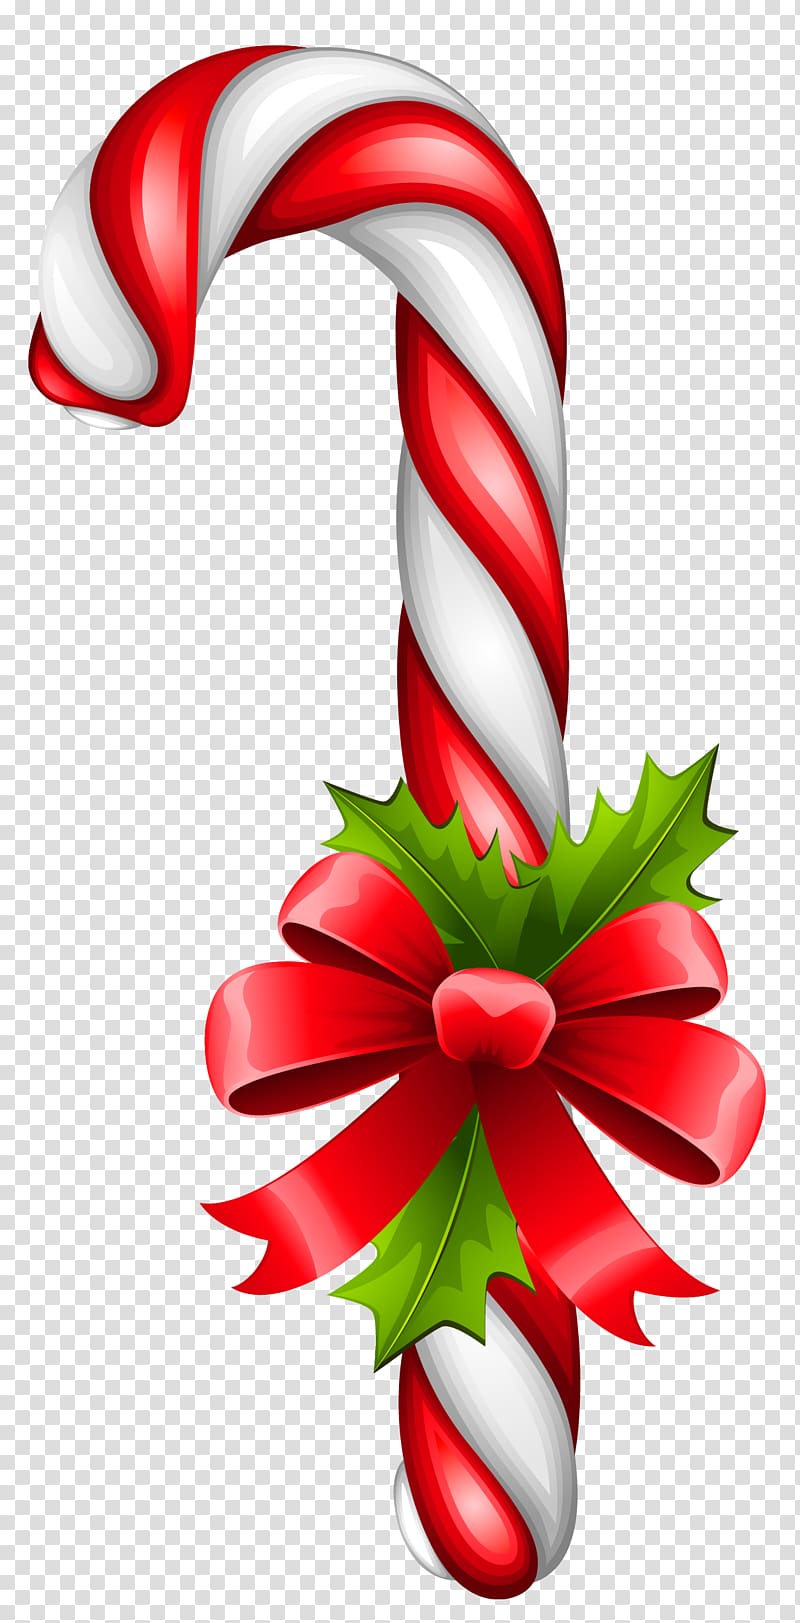 Christmas candy cane illustration, Candy cane Christmas Stick candy, Christmas Candy Cane transparent background PNG clipart